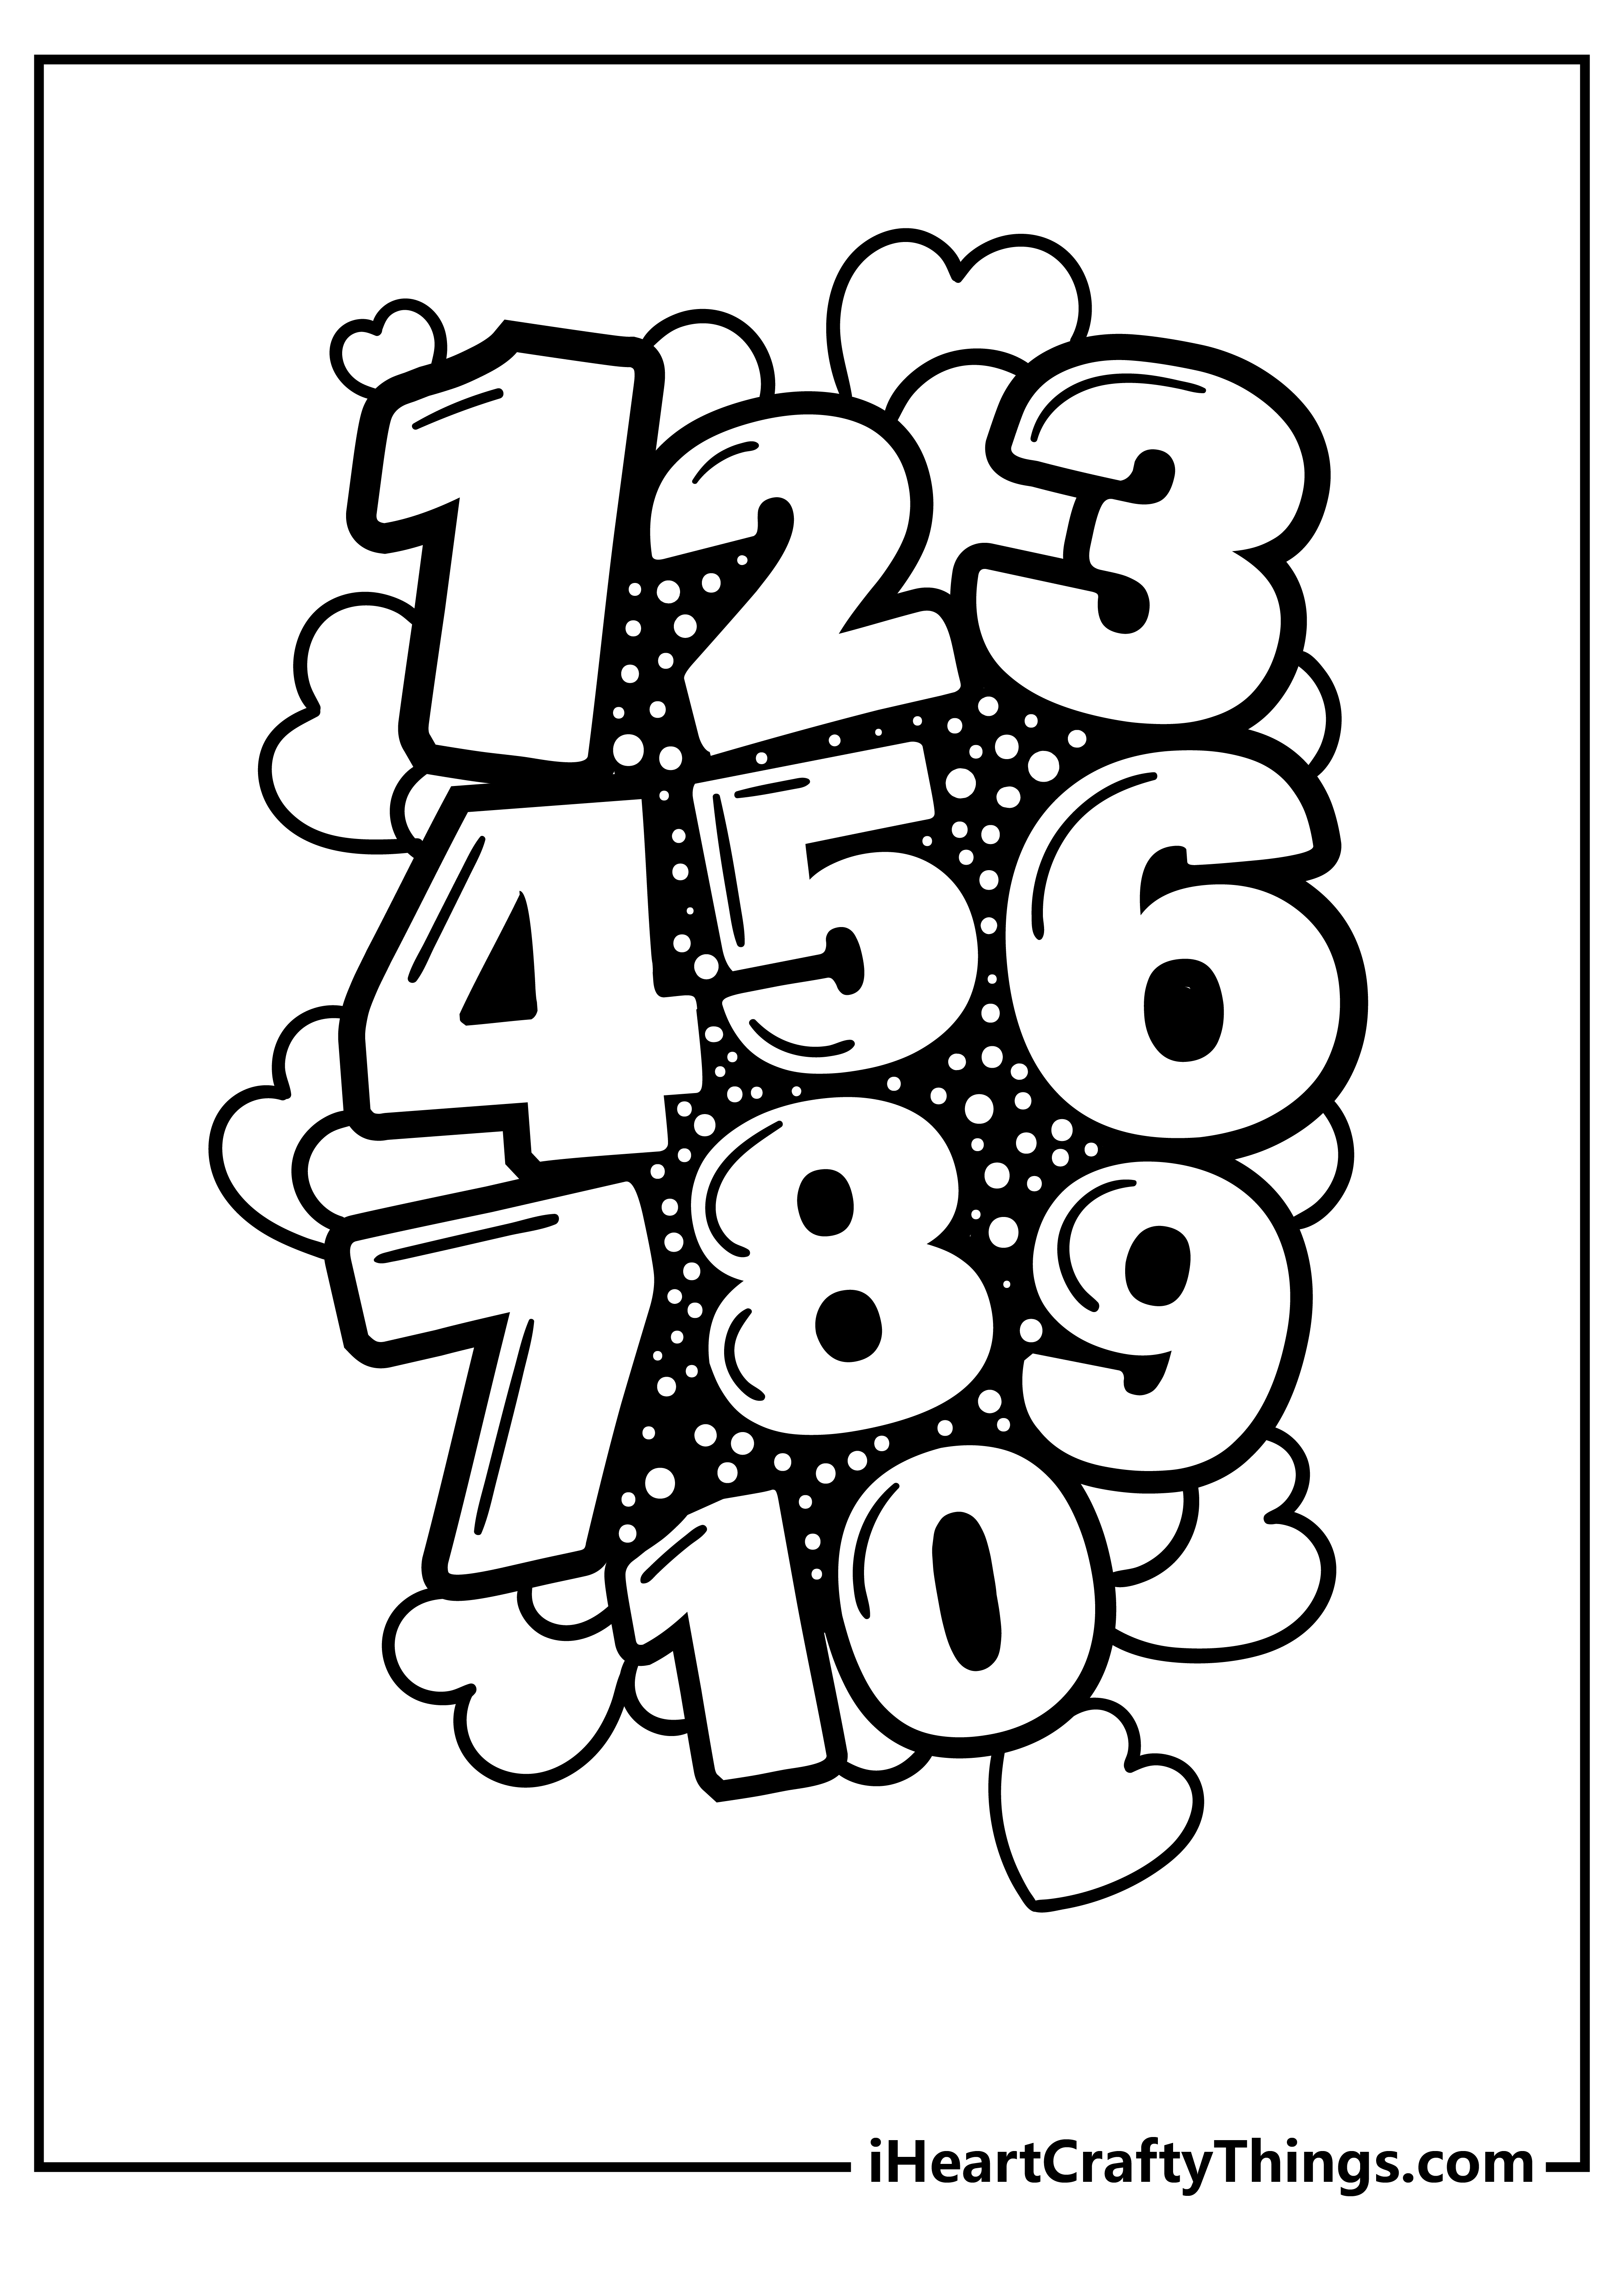 Number Coloring Book for adults free download